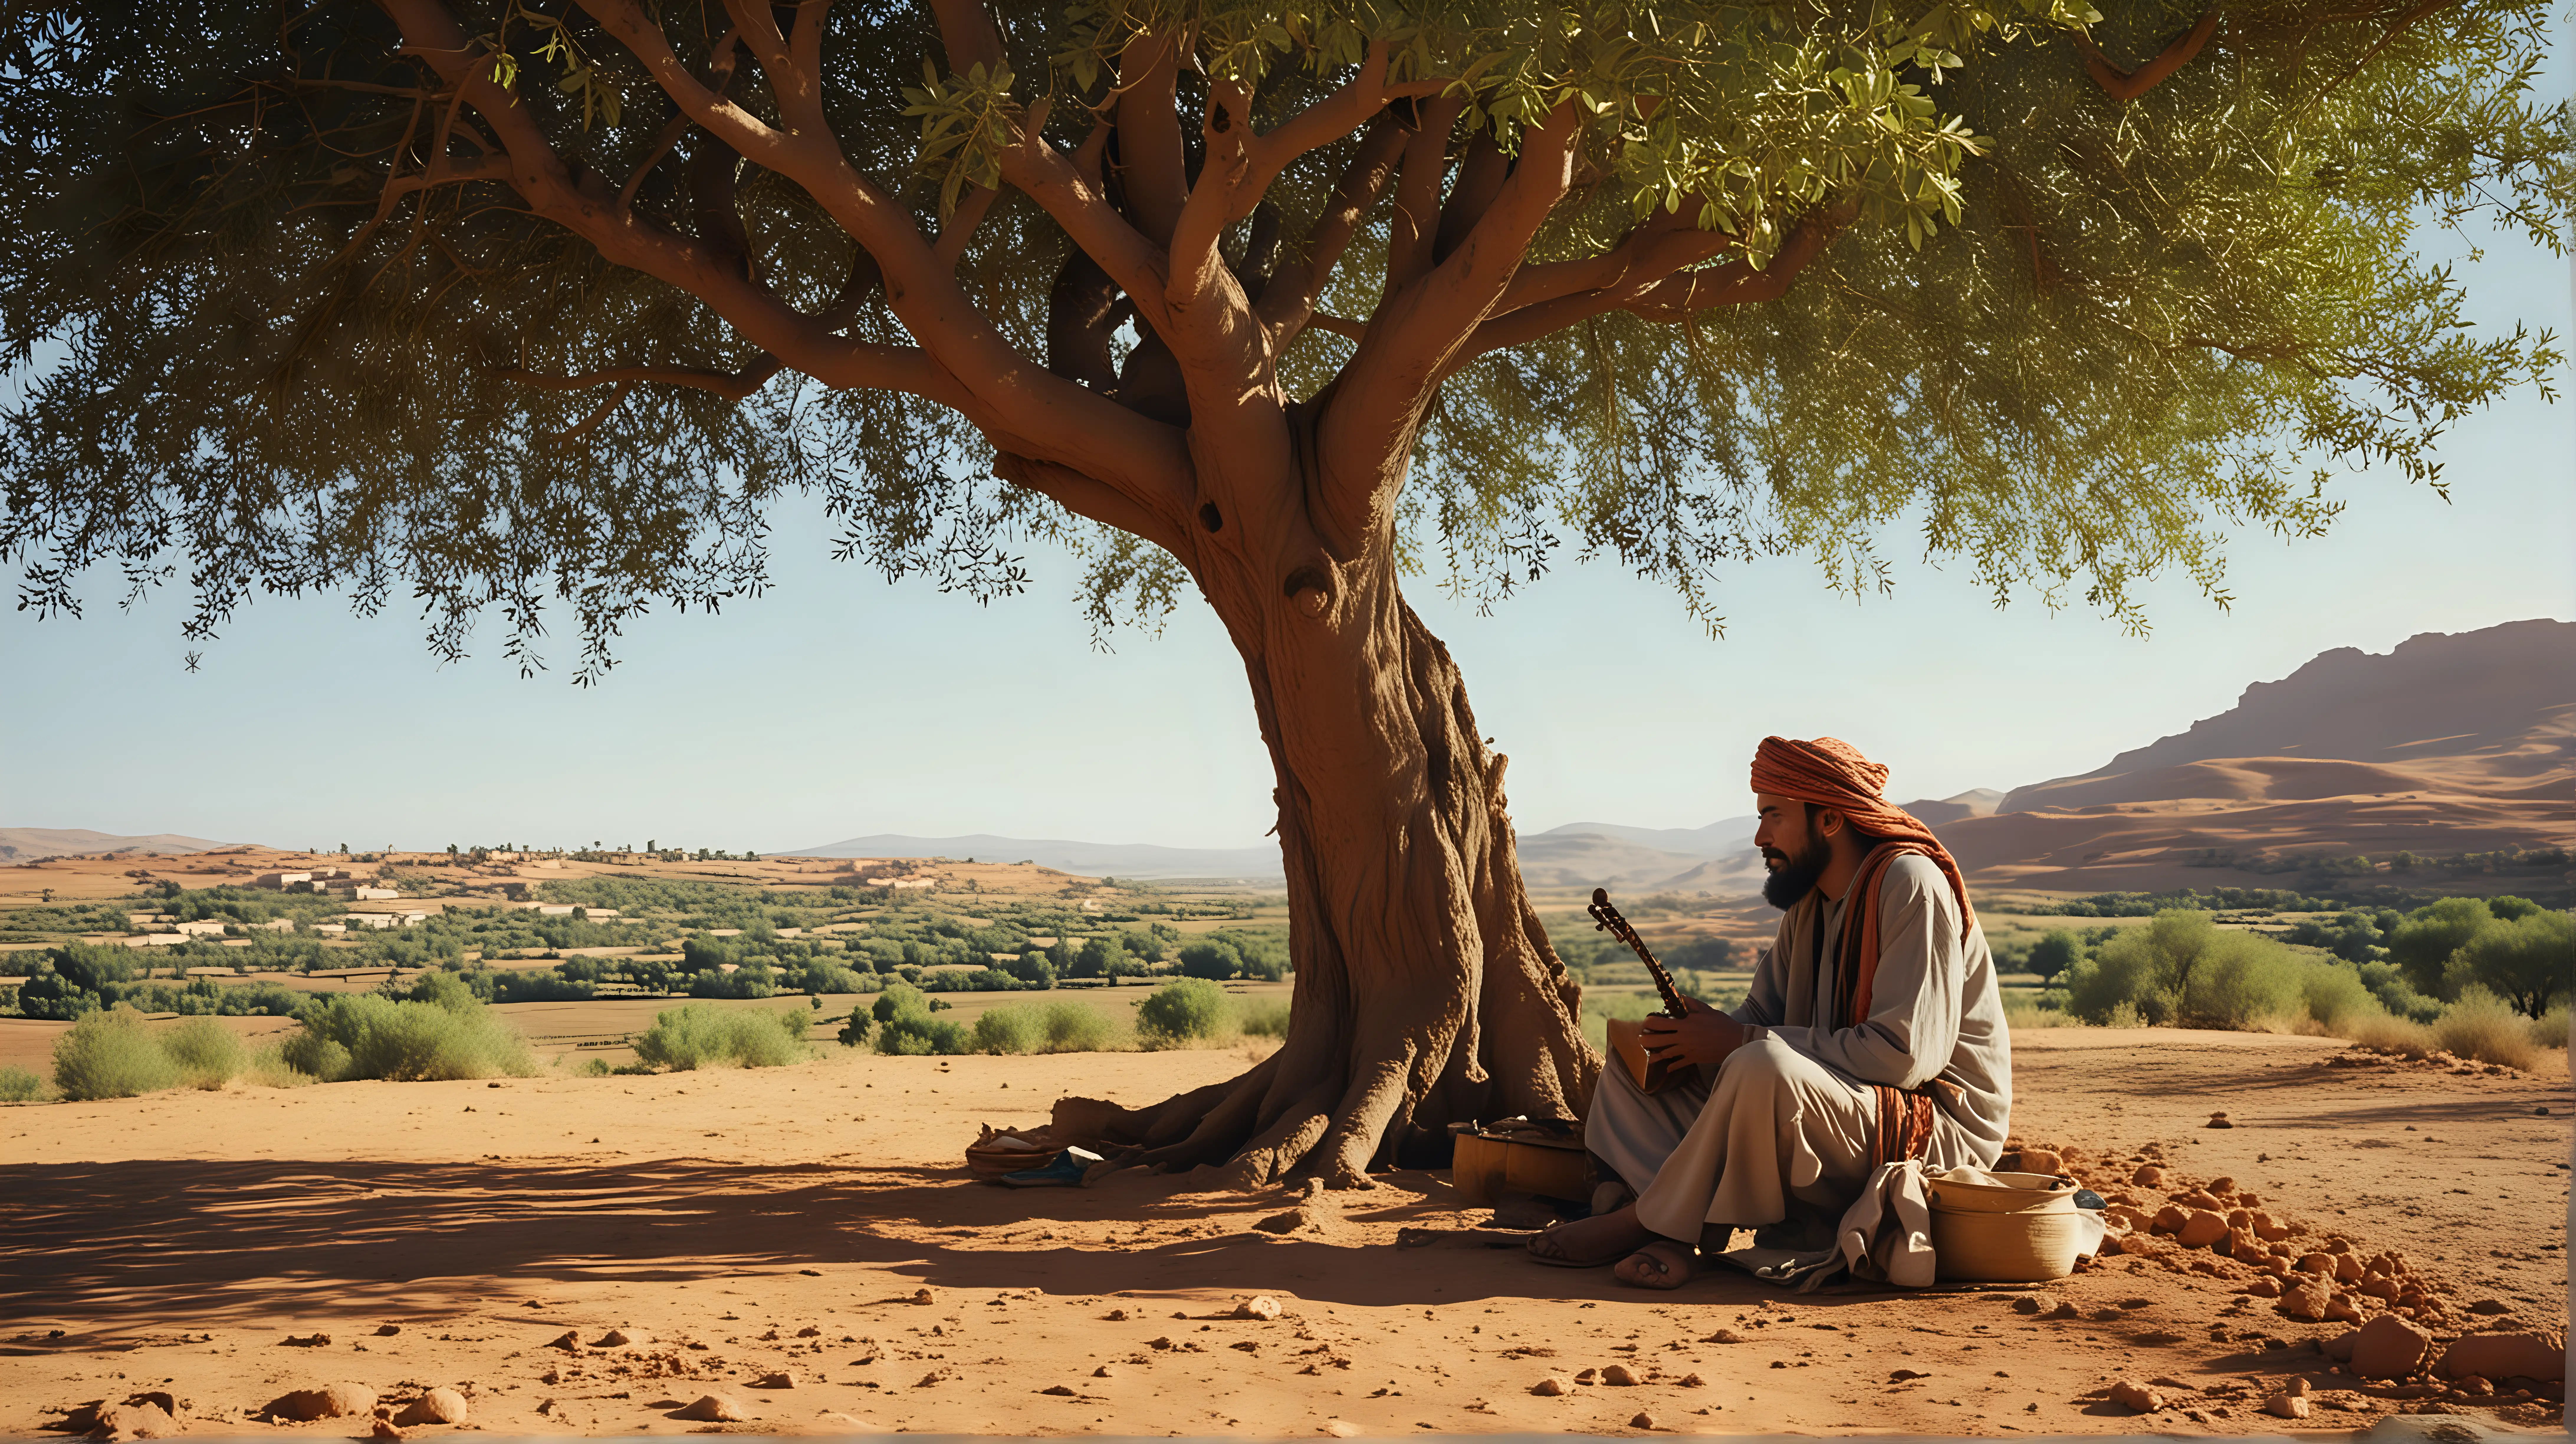 lonely Moroccan musician, sits under a tree, at the side of a path in the country side, having lunch, a traditional Moroccan village can be seen in the distance, midday light, cinematic, close-up shot